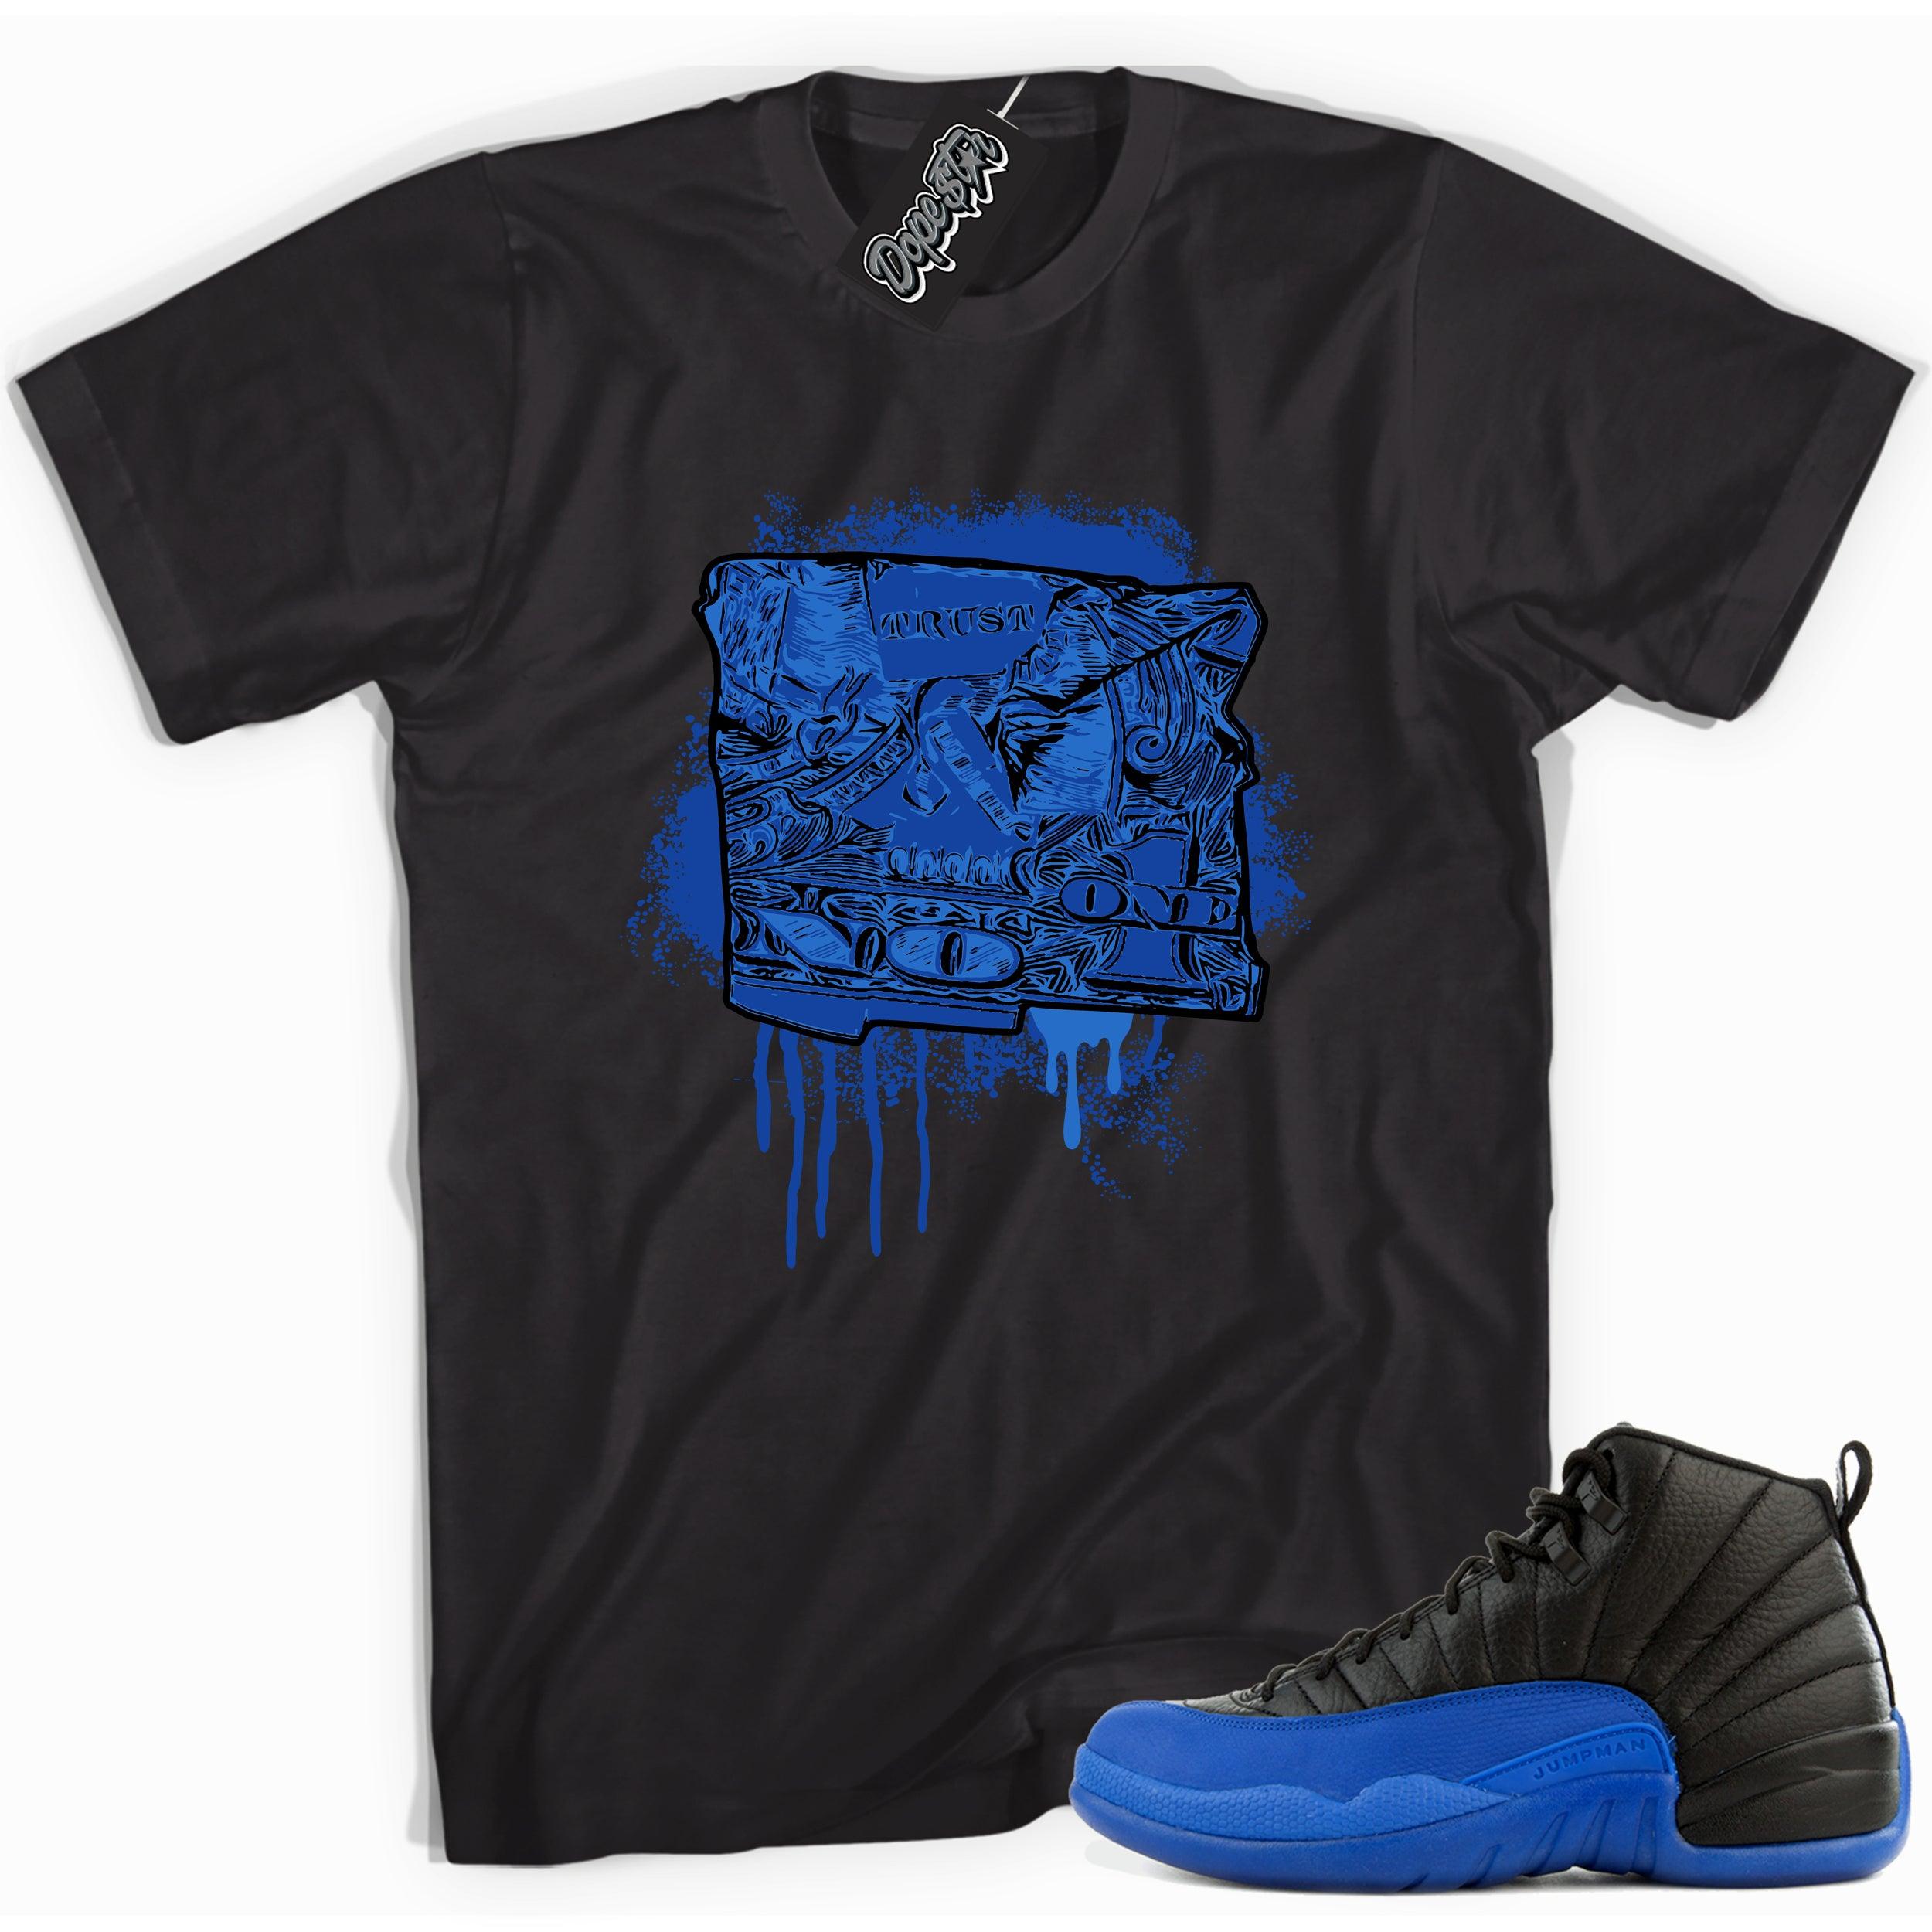 Cool black graphic tee with 'trust no one' print, that perfectly matches  Air Jordan 12 Retro Black Game Royal sneakers.